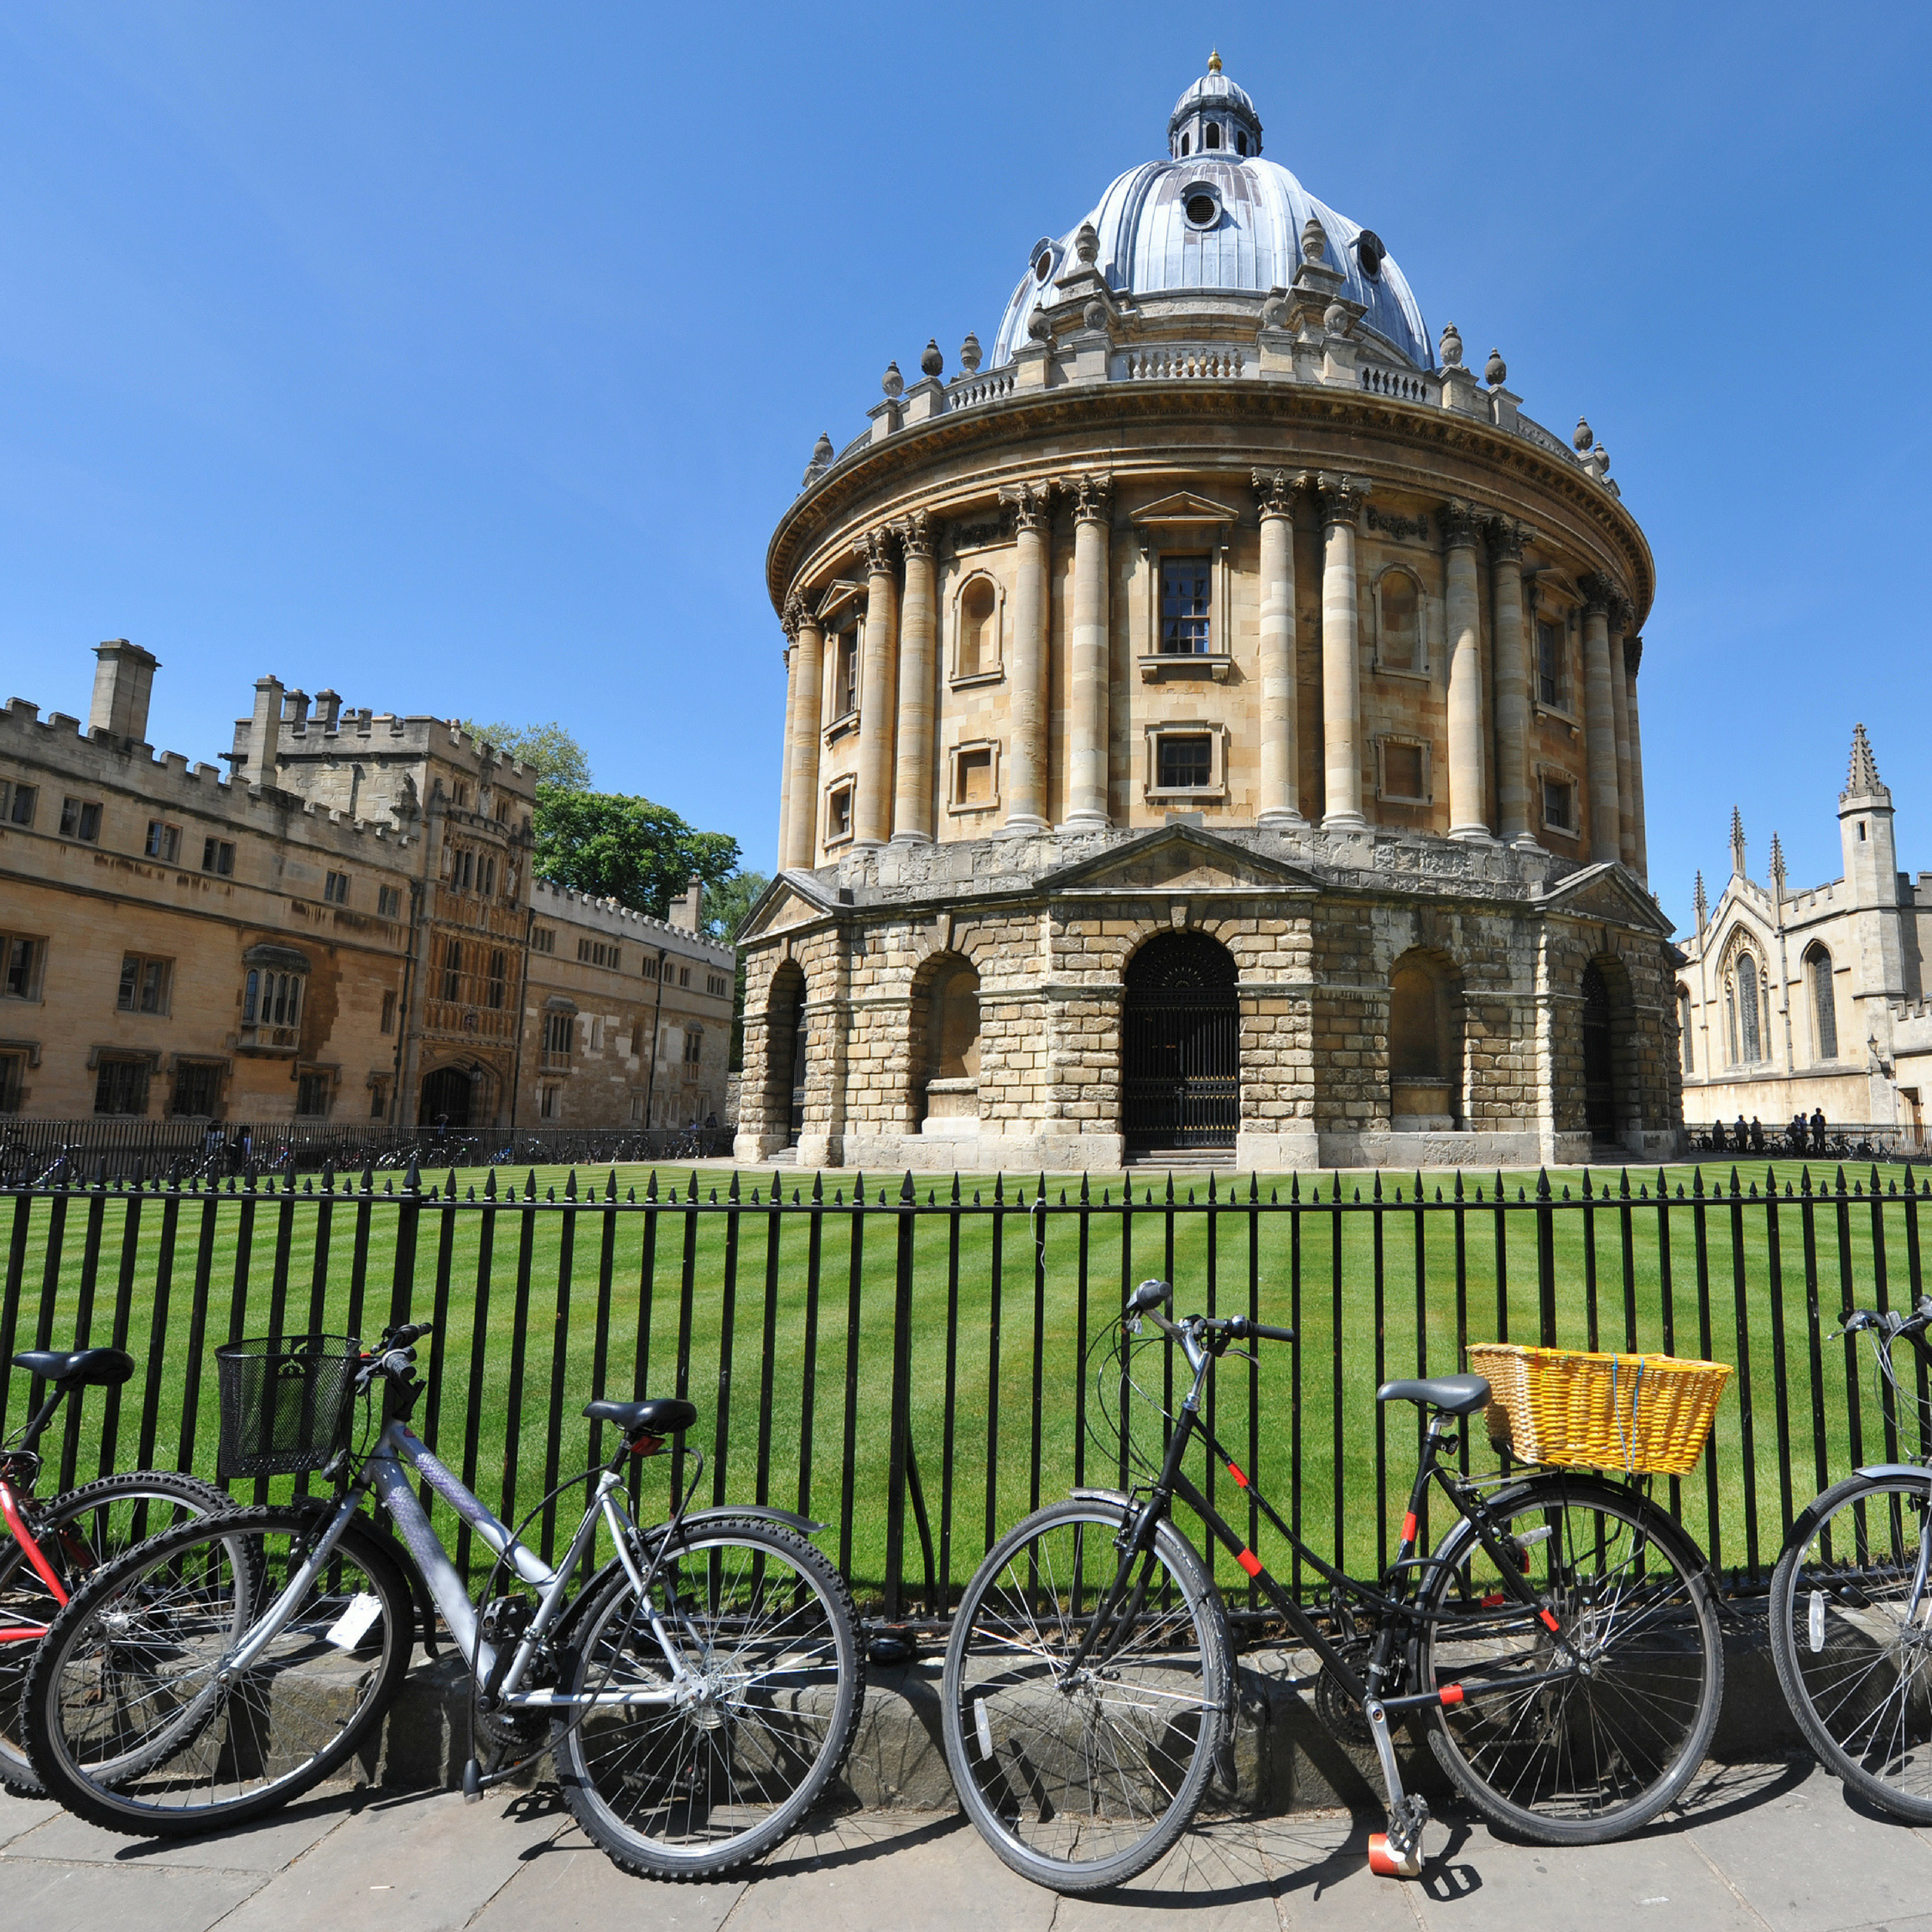 Oxford Camera building with a black railing in the foregound with bikes lent against the railing. 